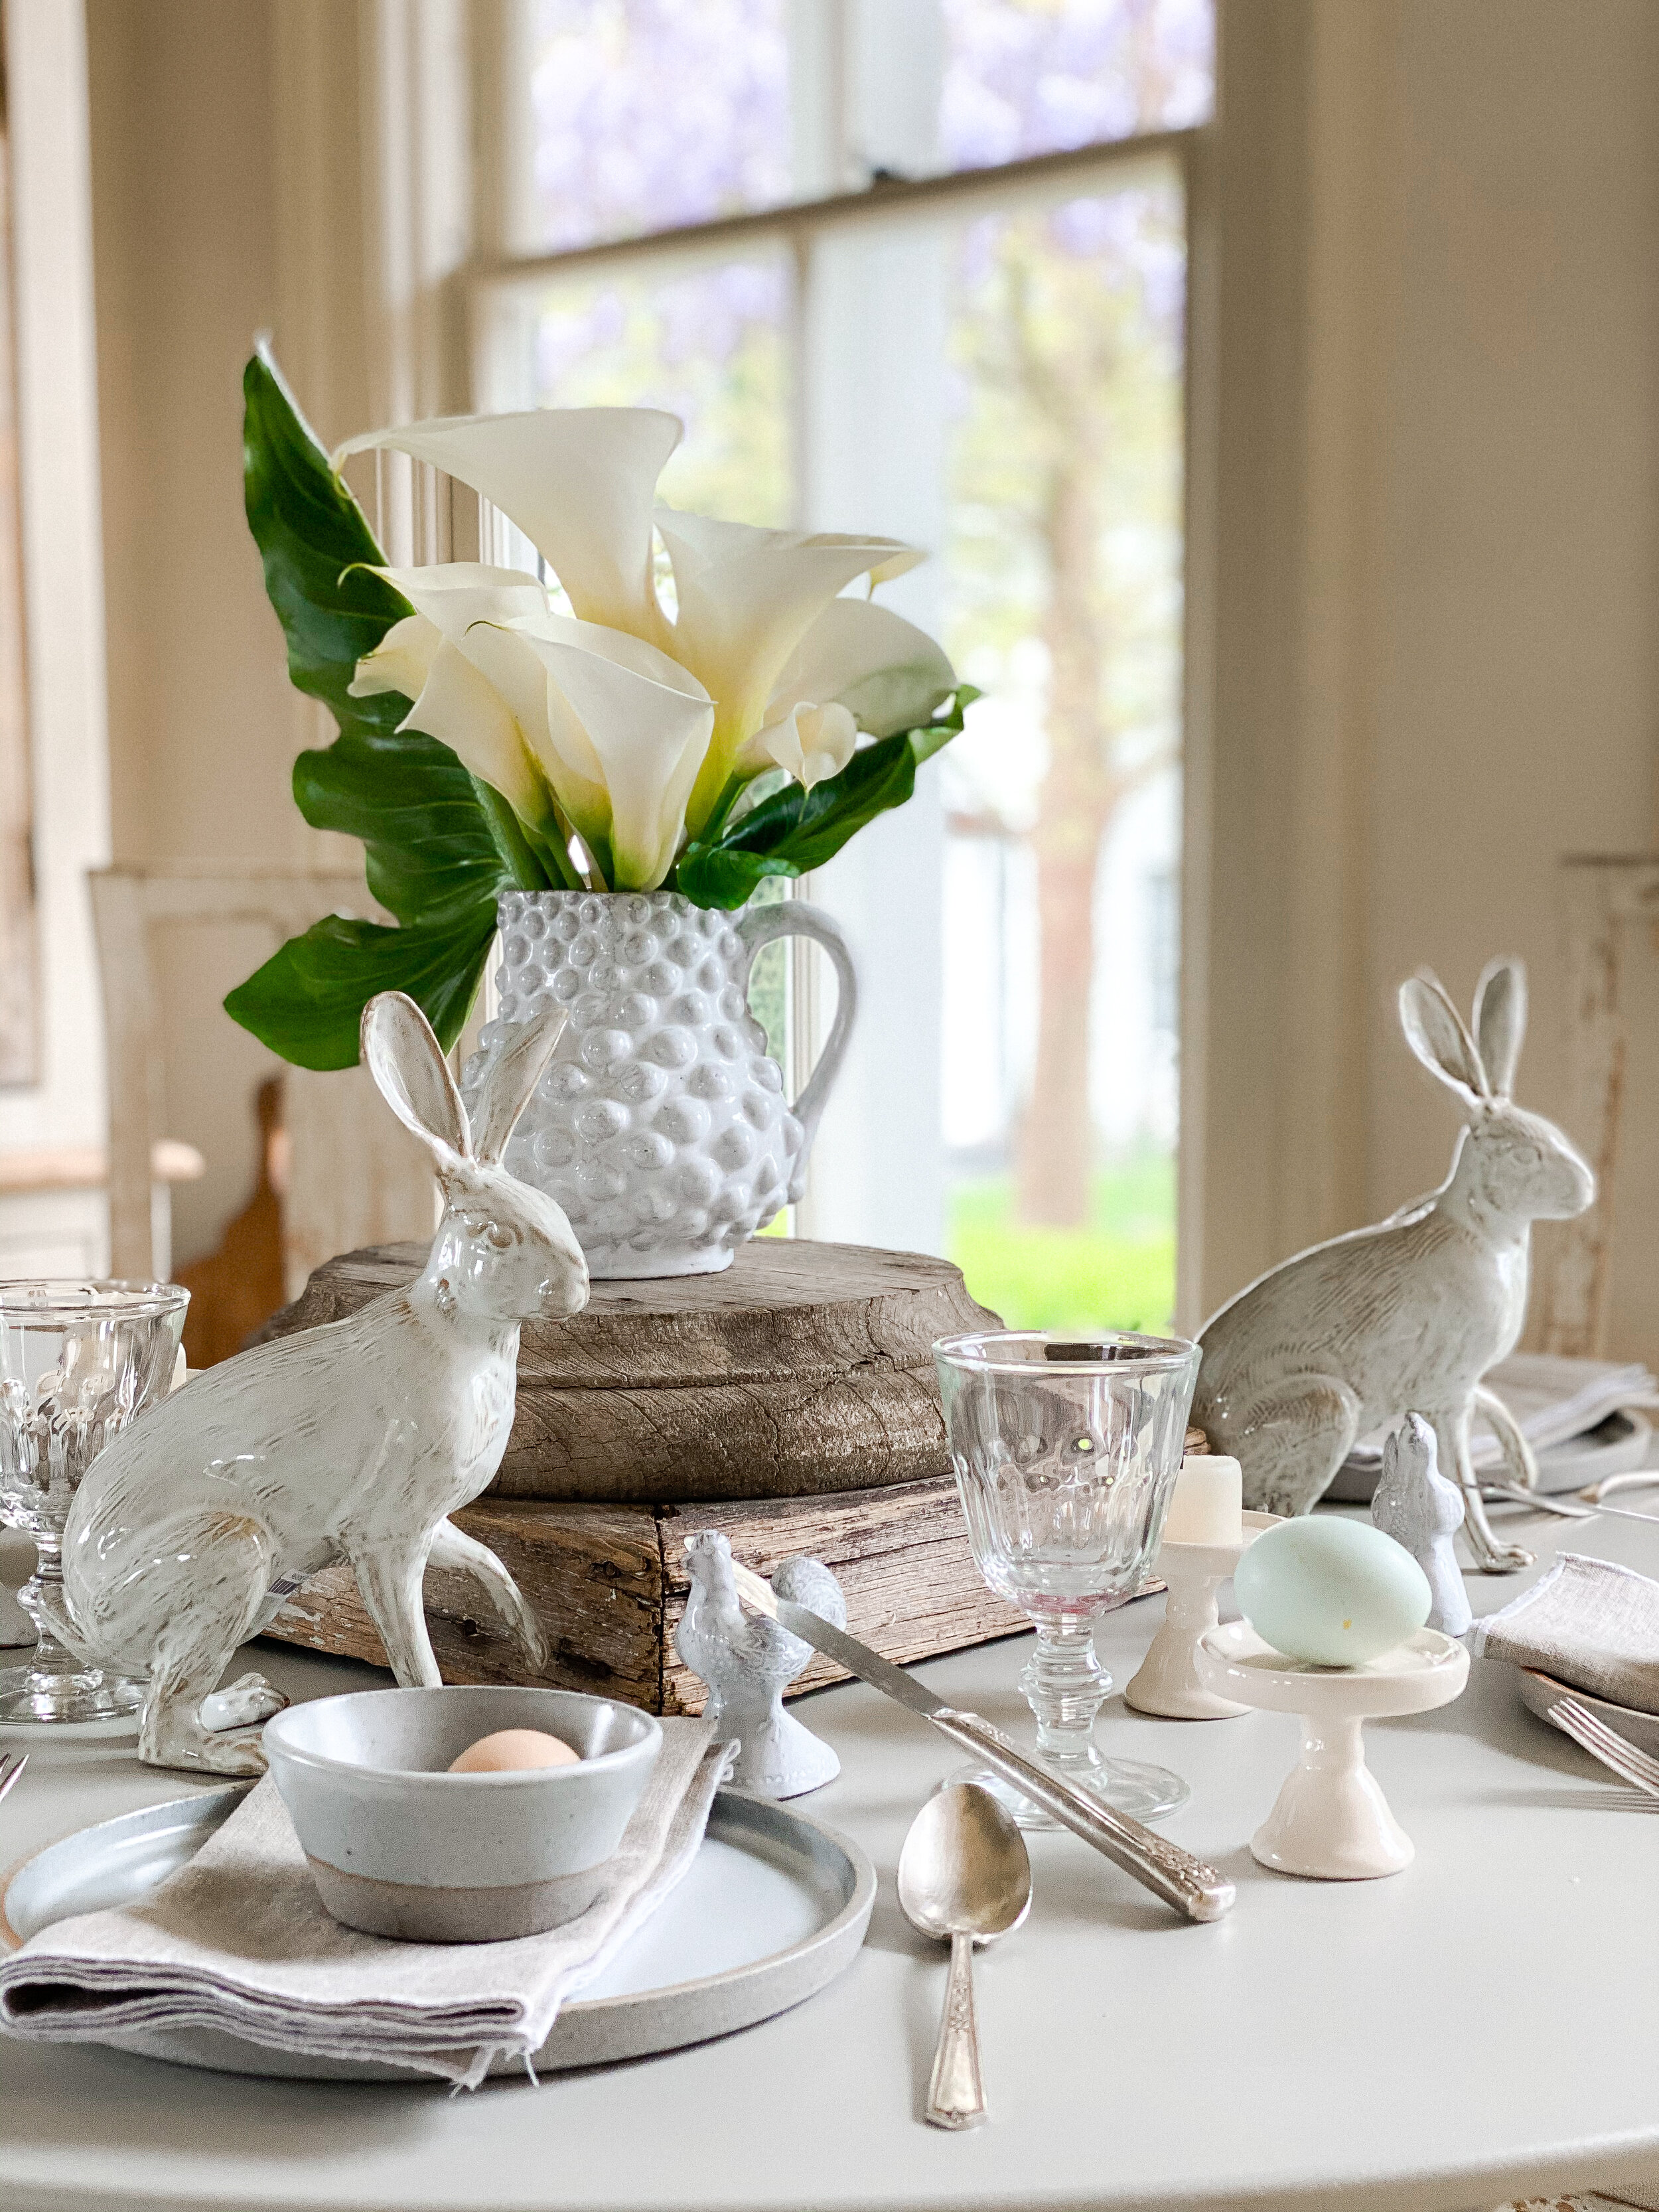 Chateau Sonoma, Easter, Easter Traditions, Home Decor, Antiques, Home Styling, Interior Design, French Antiques, Easter Decor, Celebrations, Easter Celebration, Sonoma, Sonoma California, Easter Tablescape, Tablescape, Table Decor, Dinnerware, Carte…